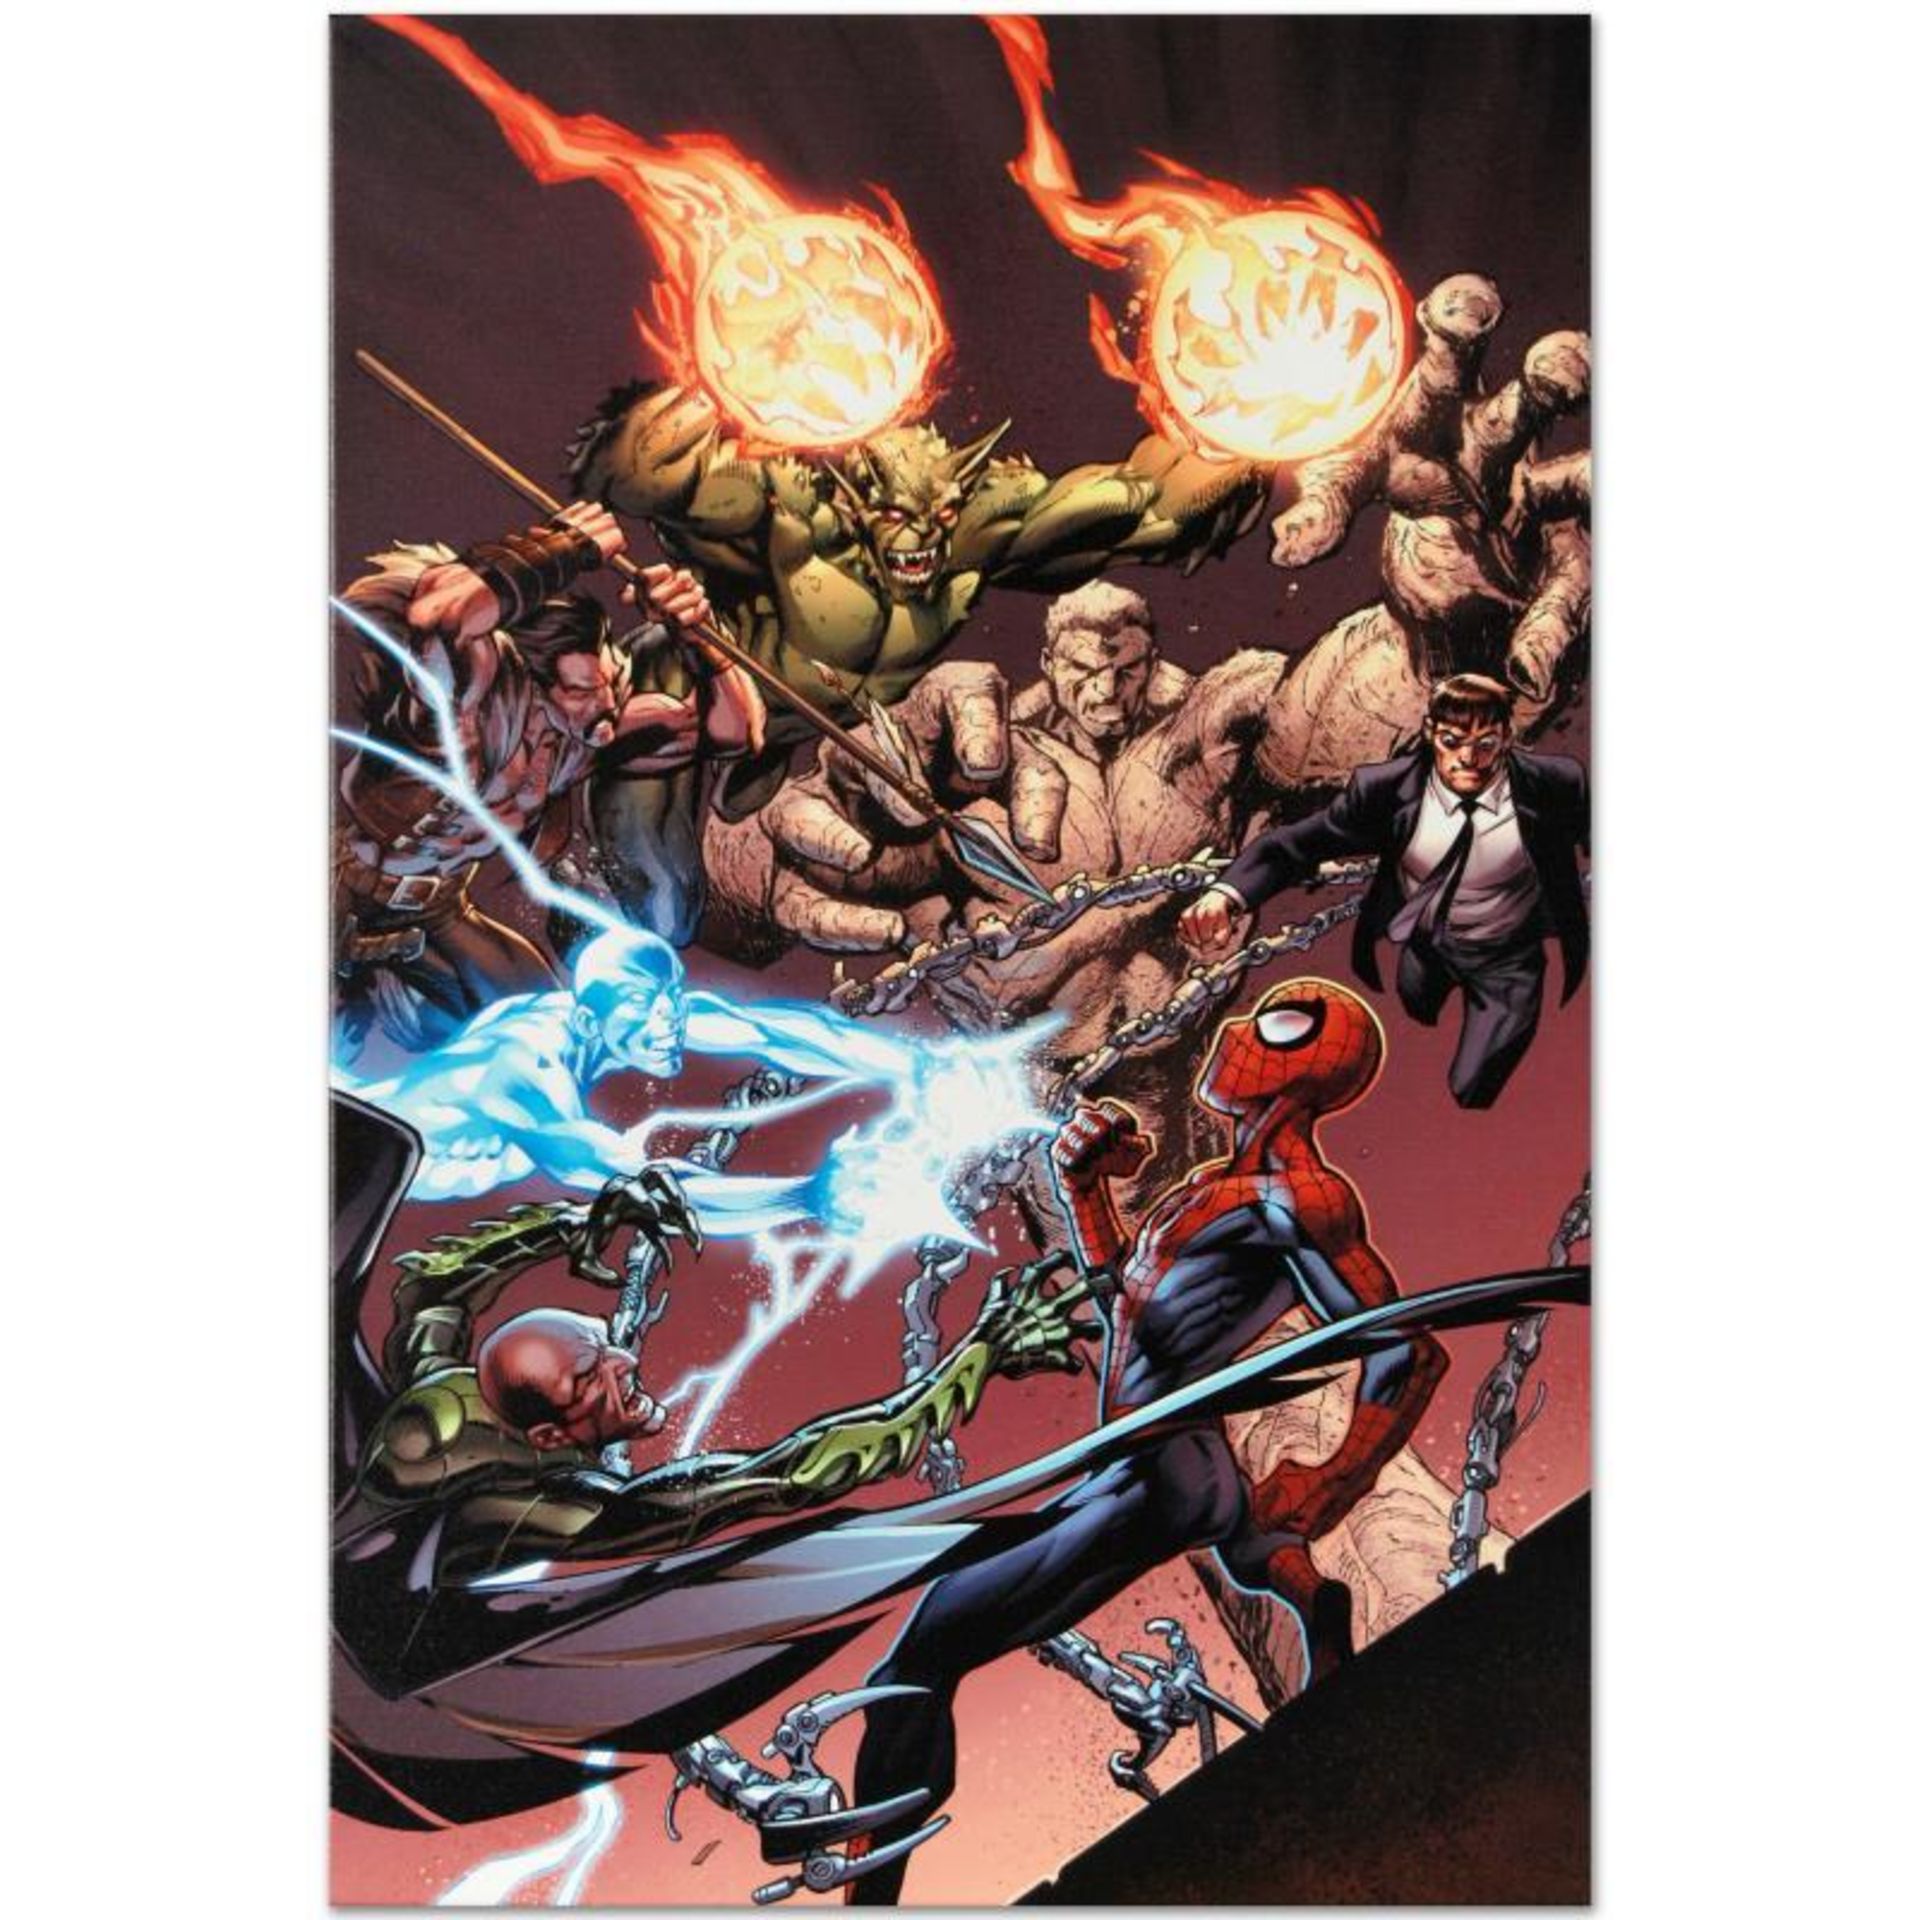 Marvel Comics "Ultimate Spider-Man #158" Numbered Limited Edition Giclee on Canv